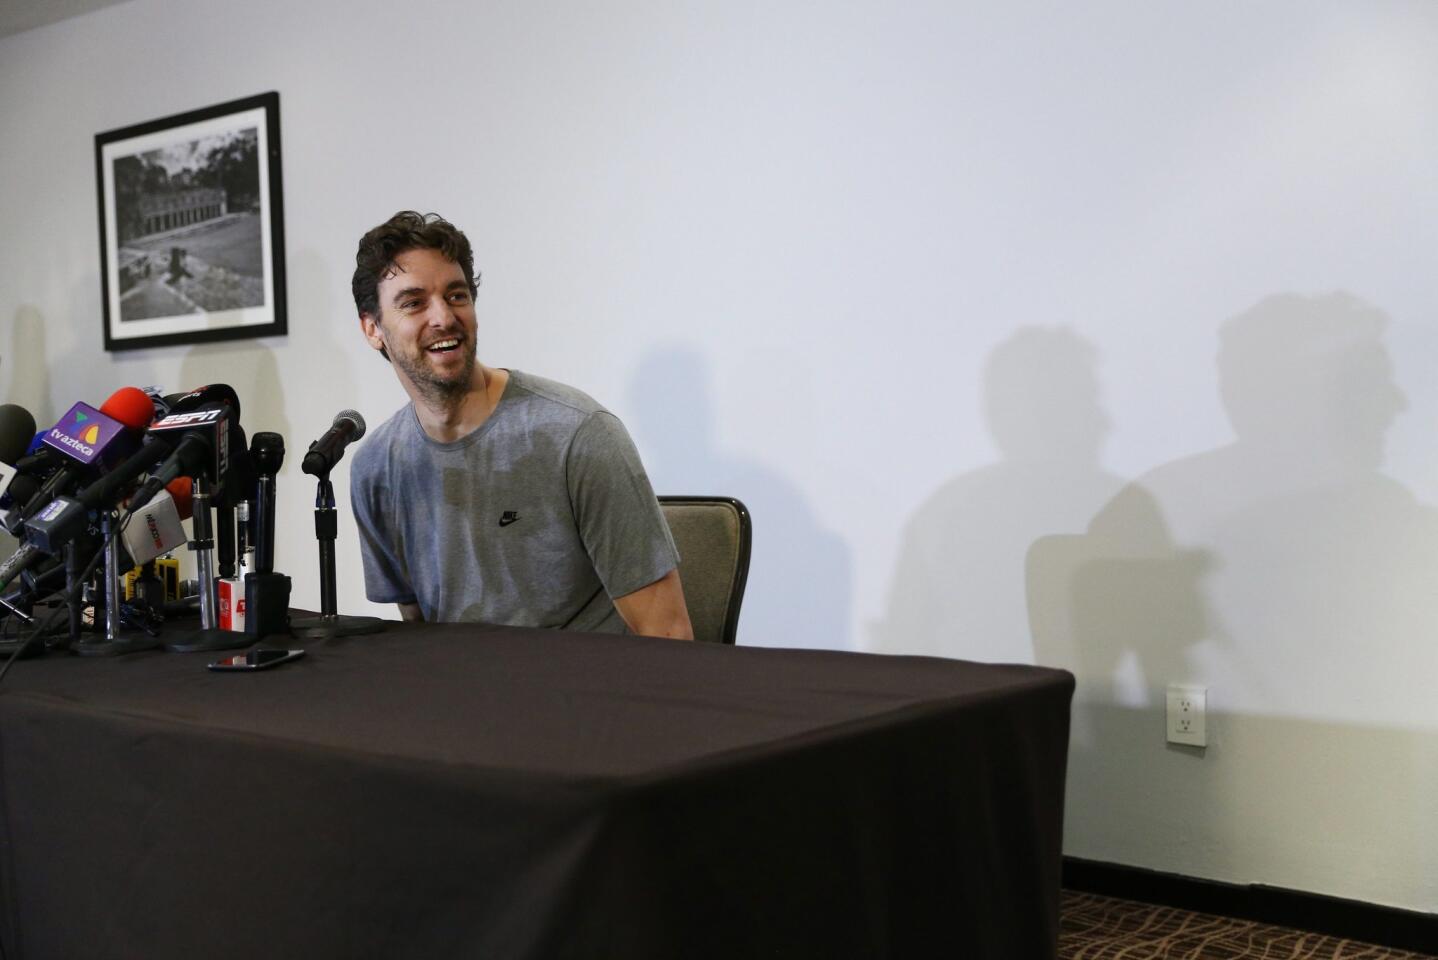 Pau Gasol reacts during a press conference on Jan. 13, 2017, ahead of a Spurs-Suns game in Mexico City, Mexico.